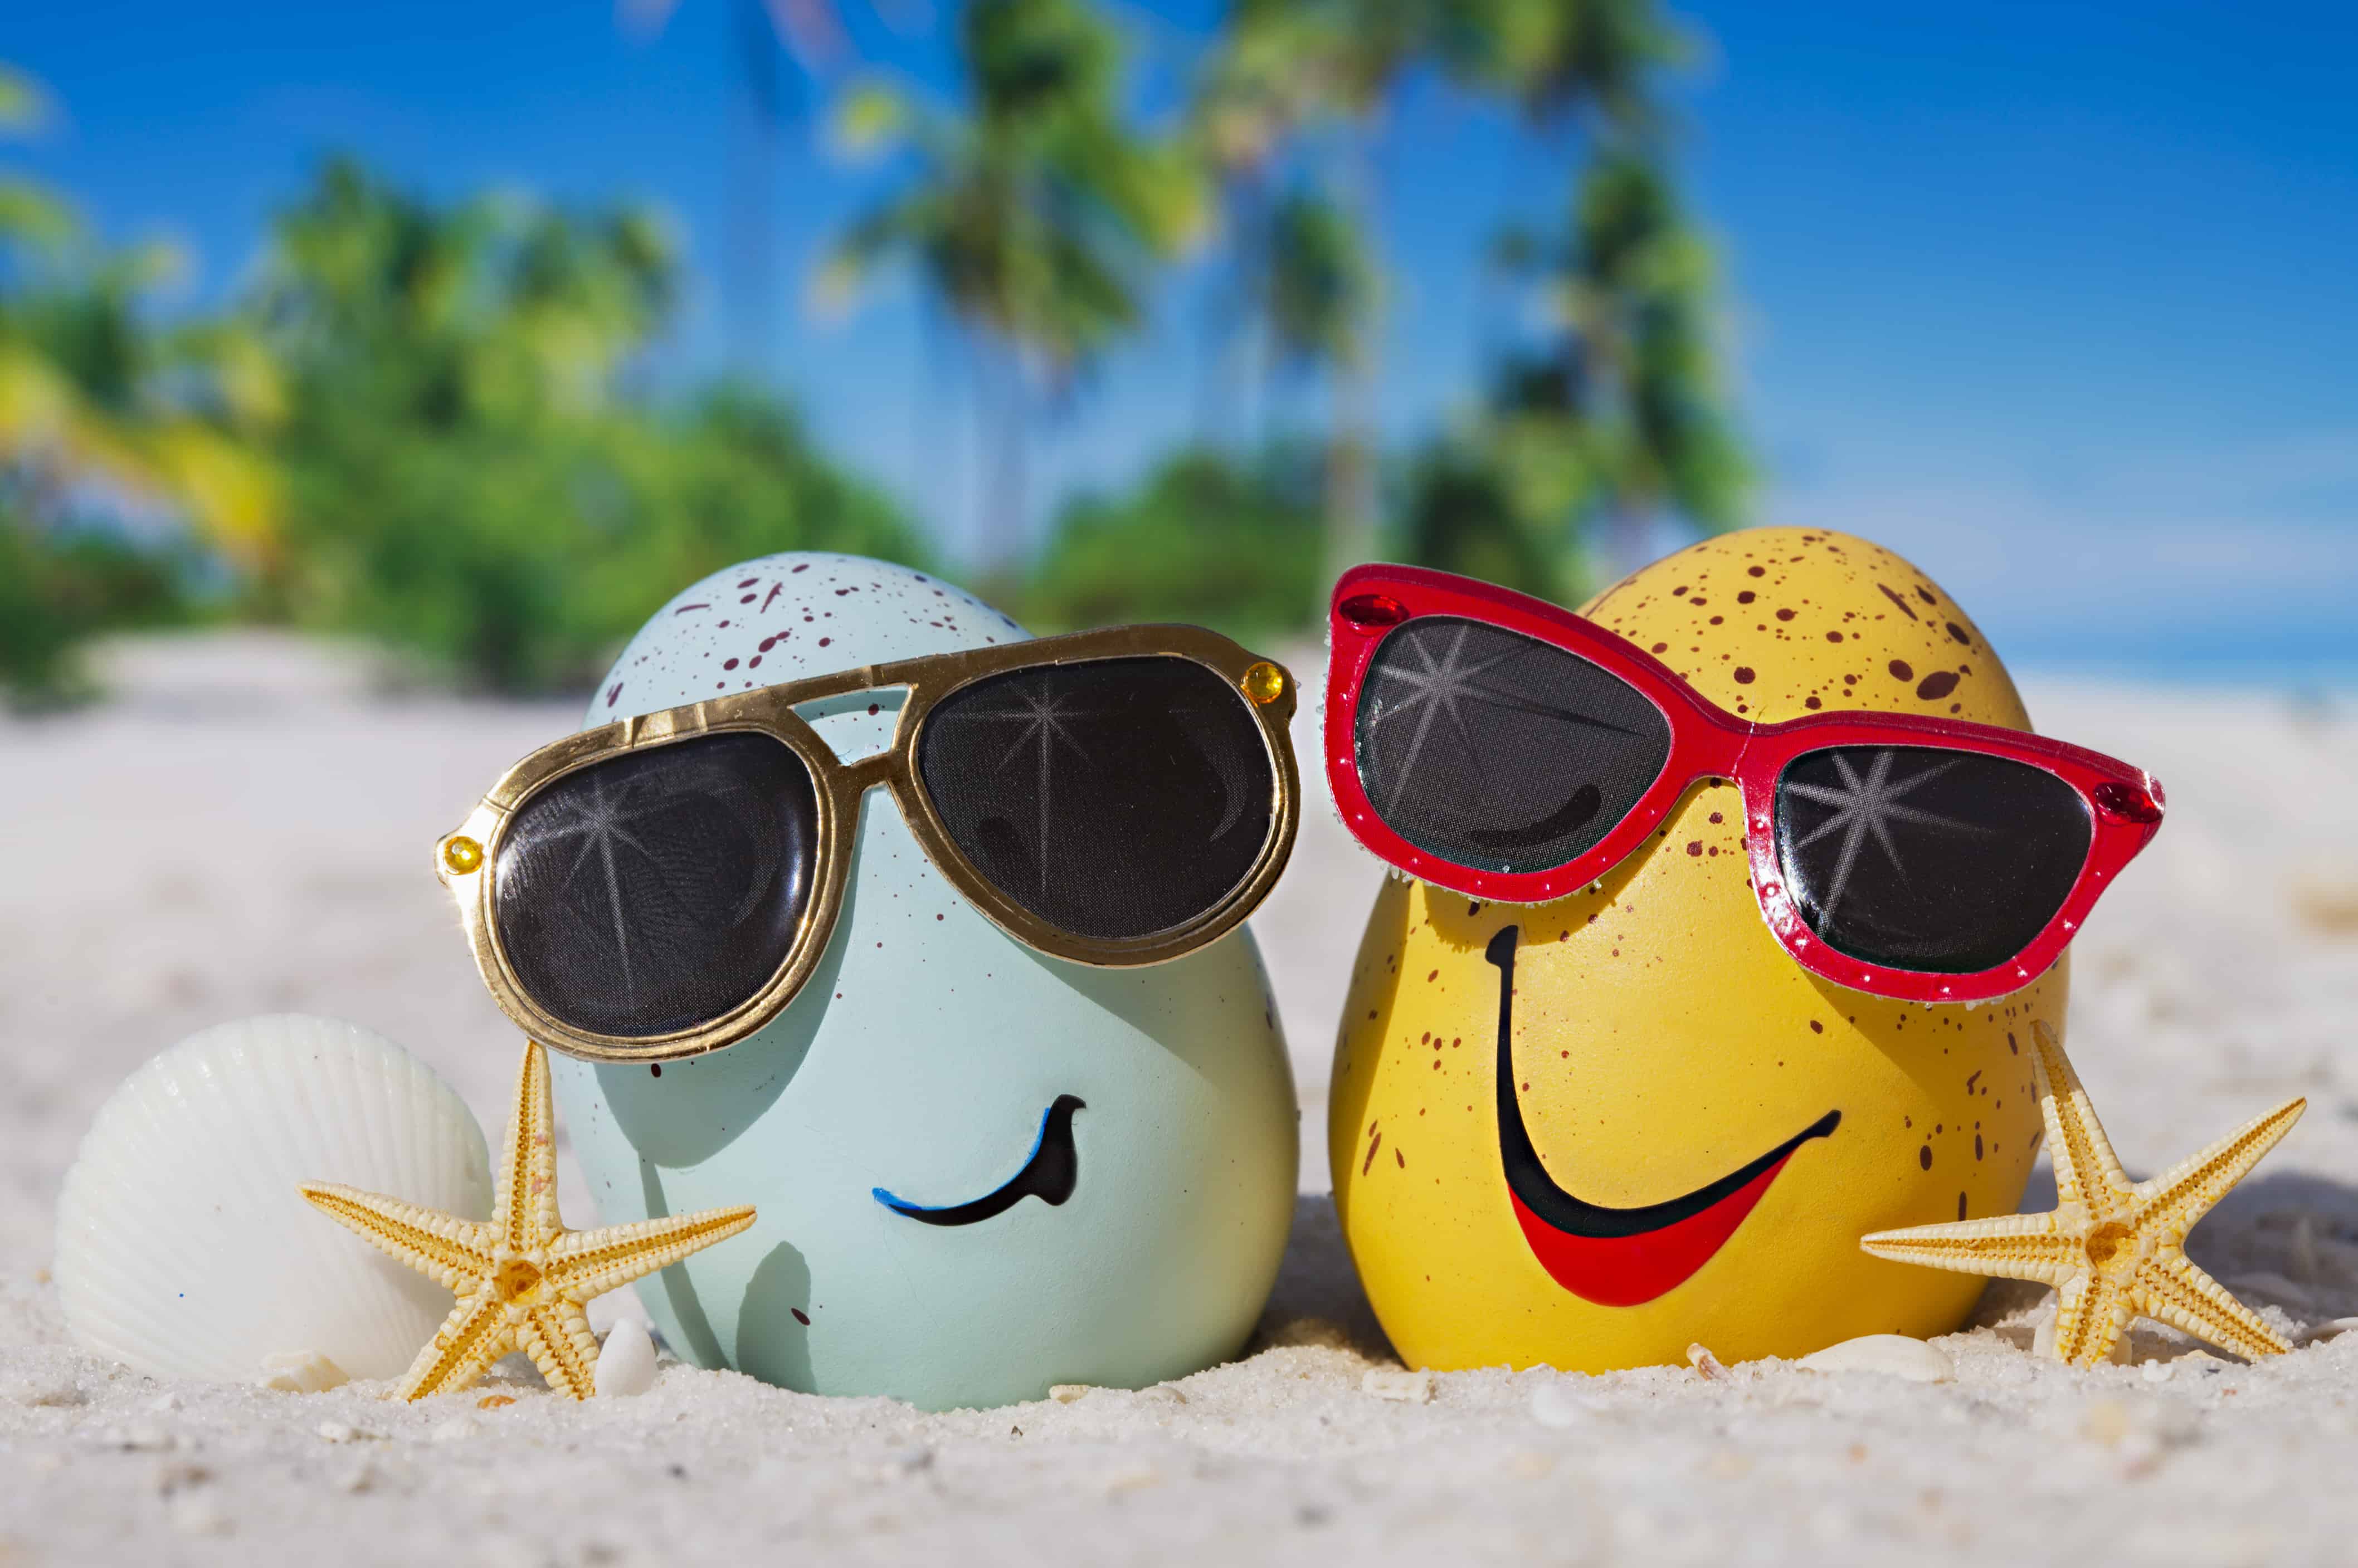 Two Easter eggs wearing sunglasses on a beach